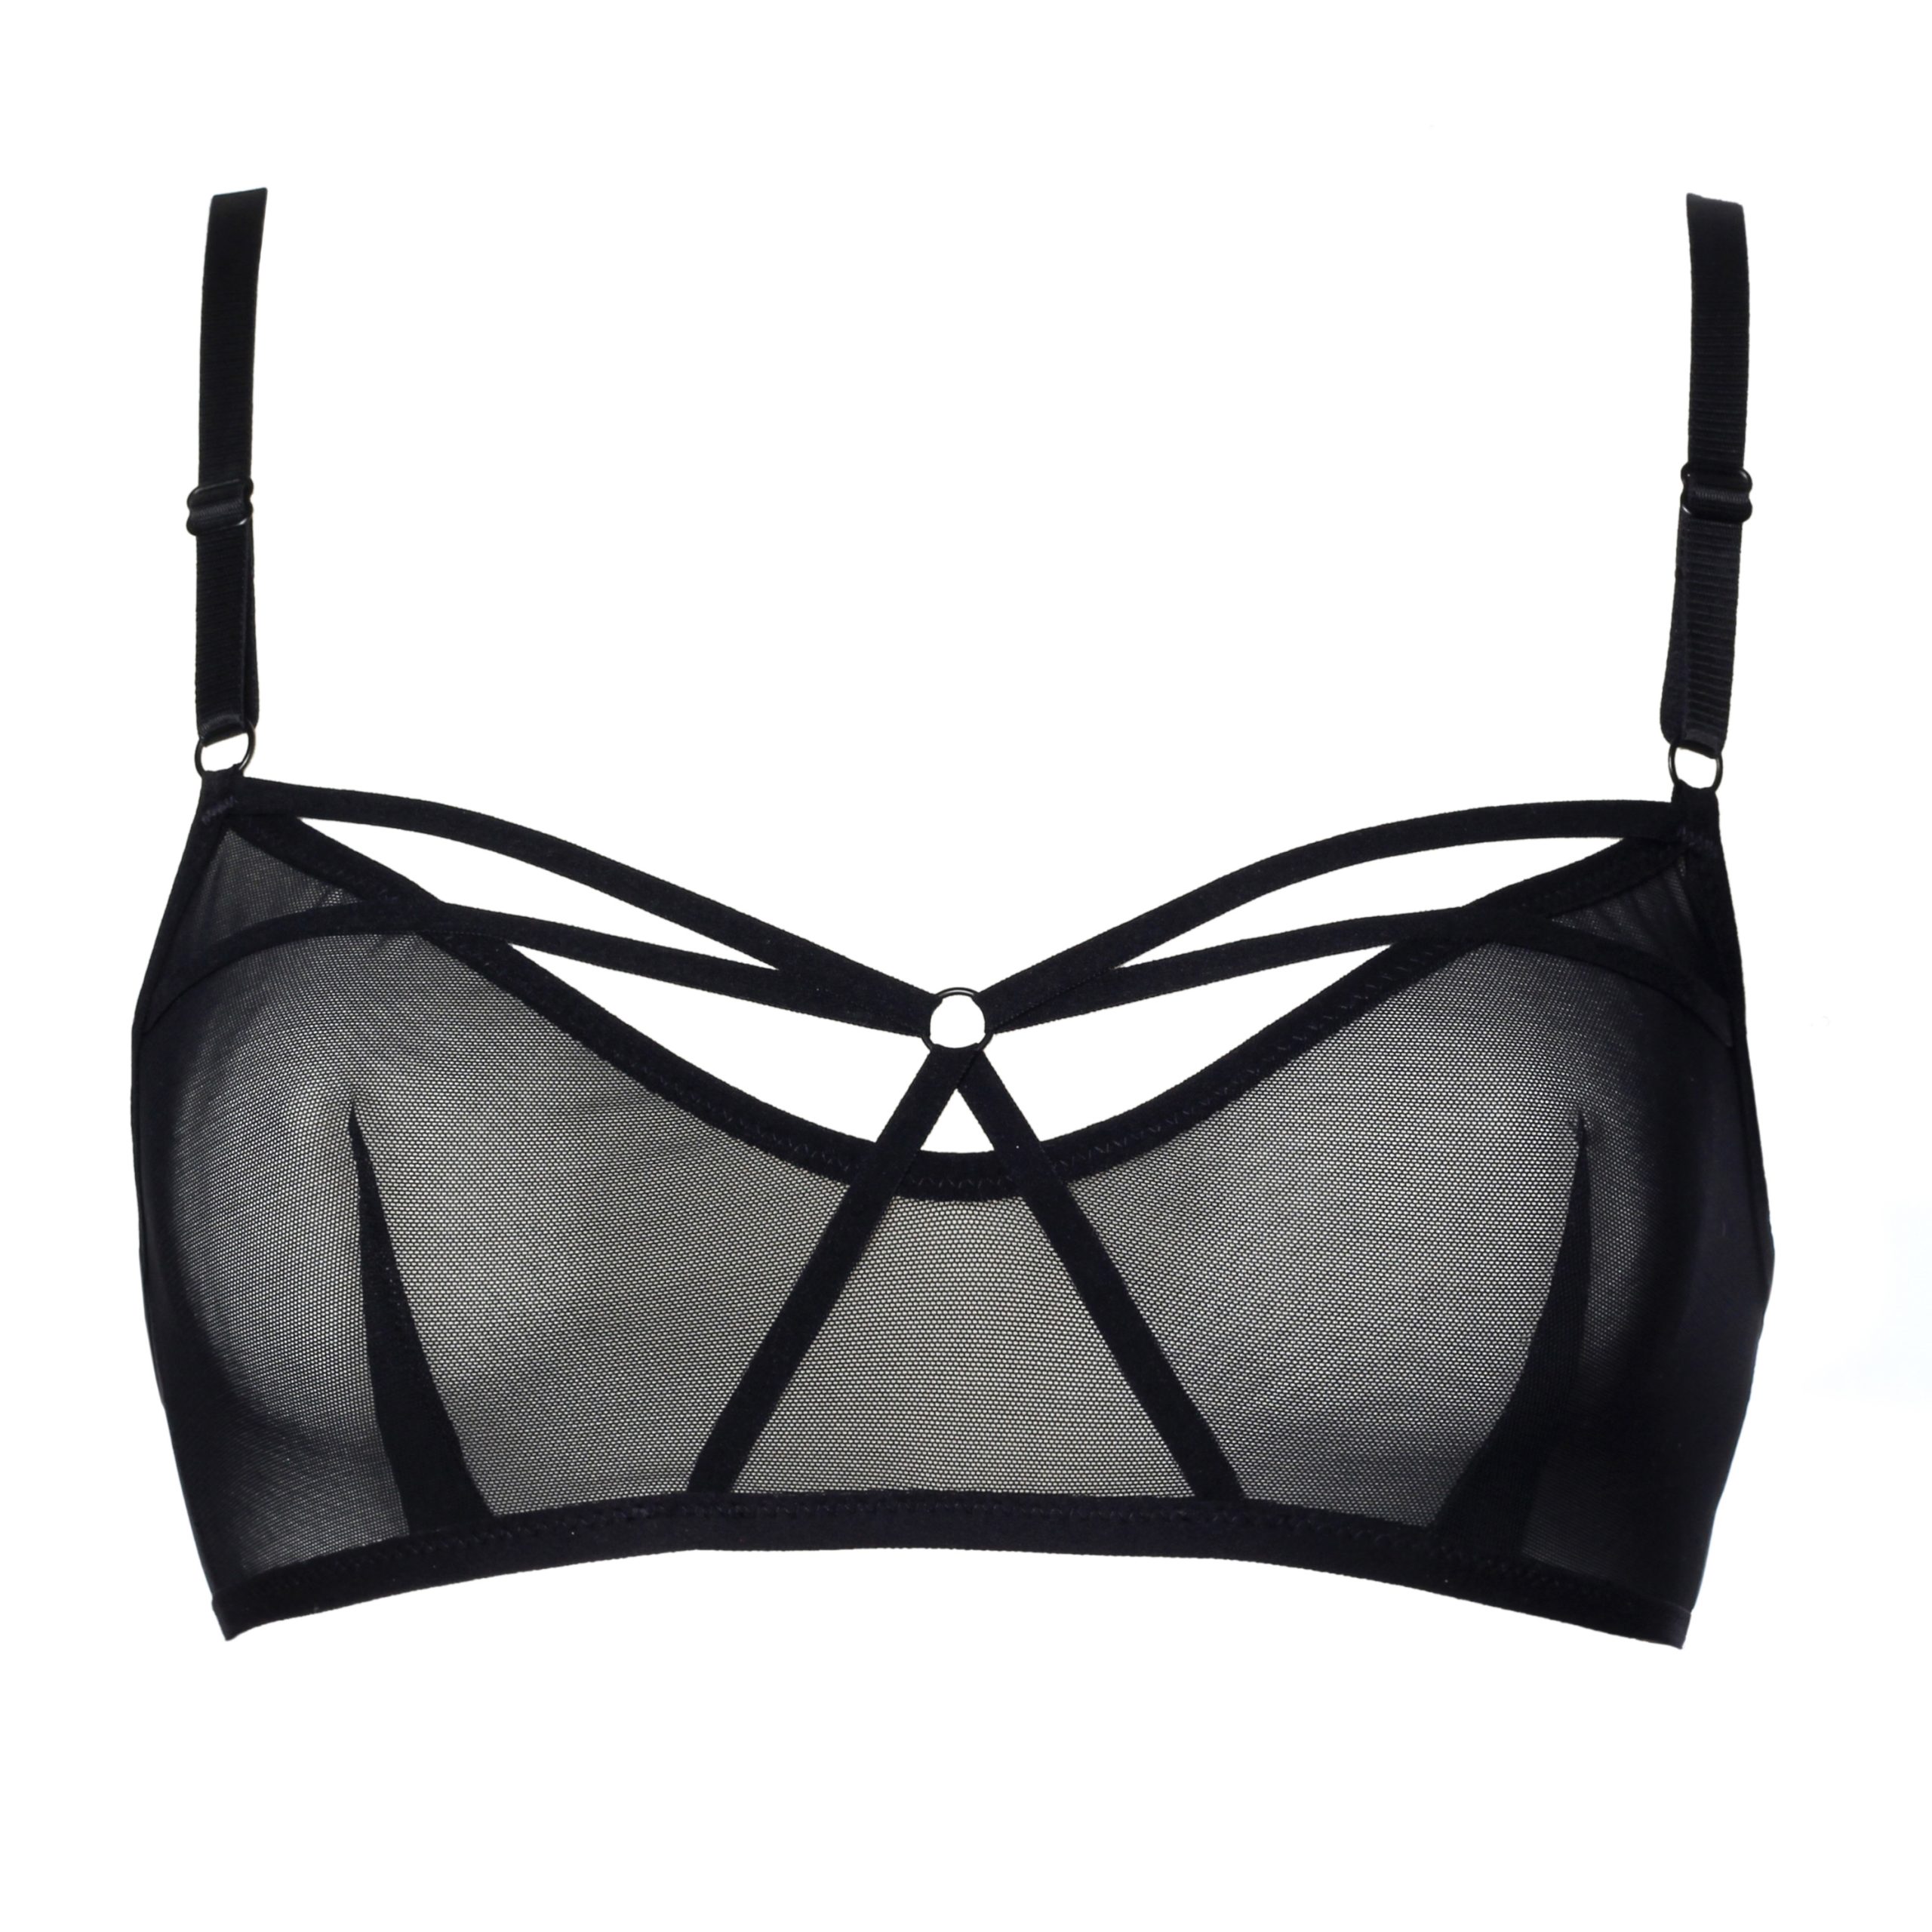 Black Mesh Bralette with Decorative Straps by Flash you and me